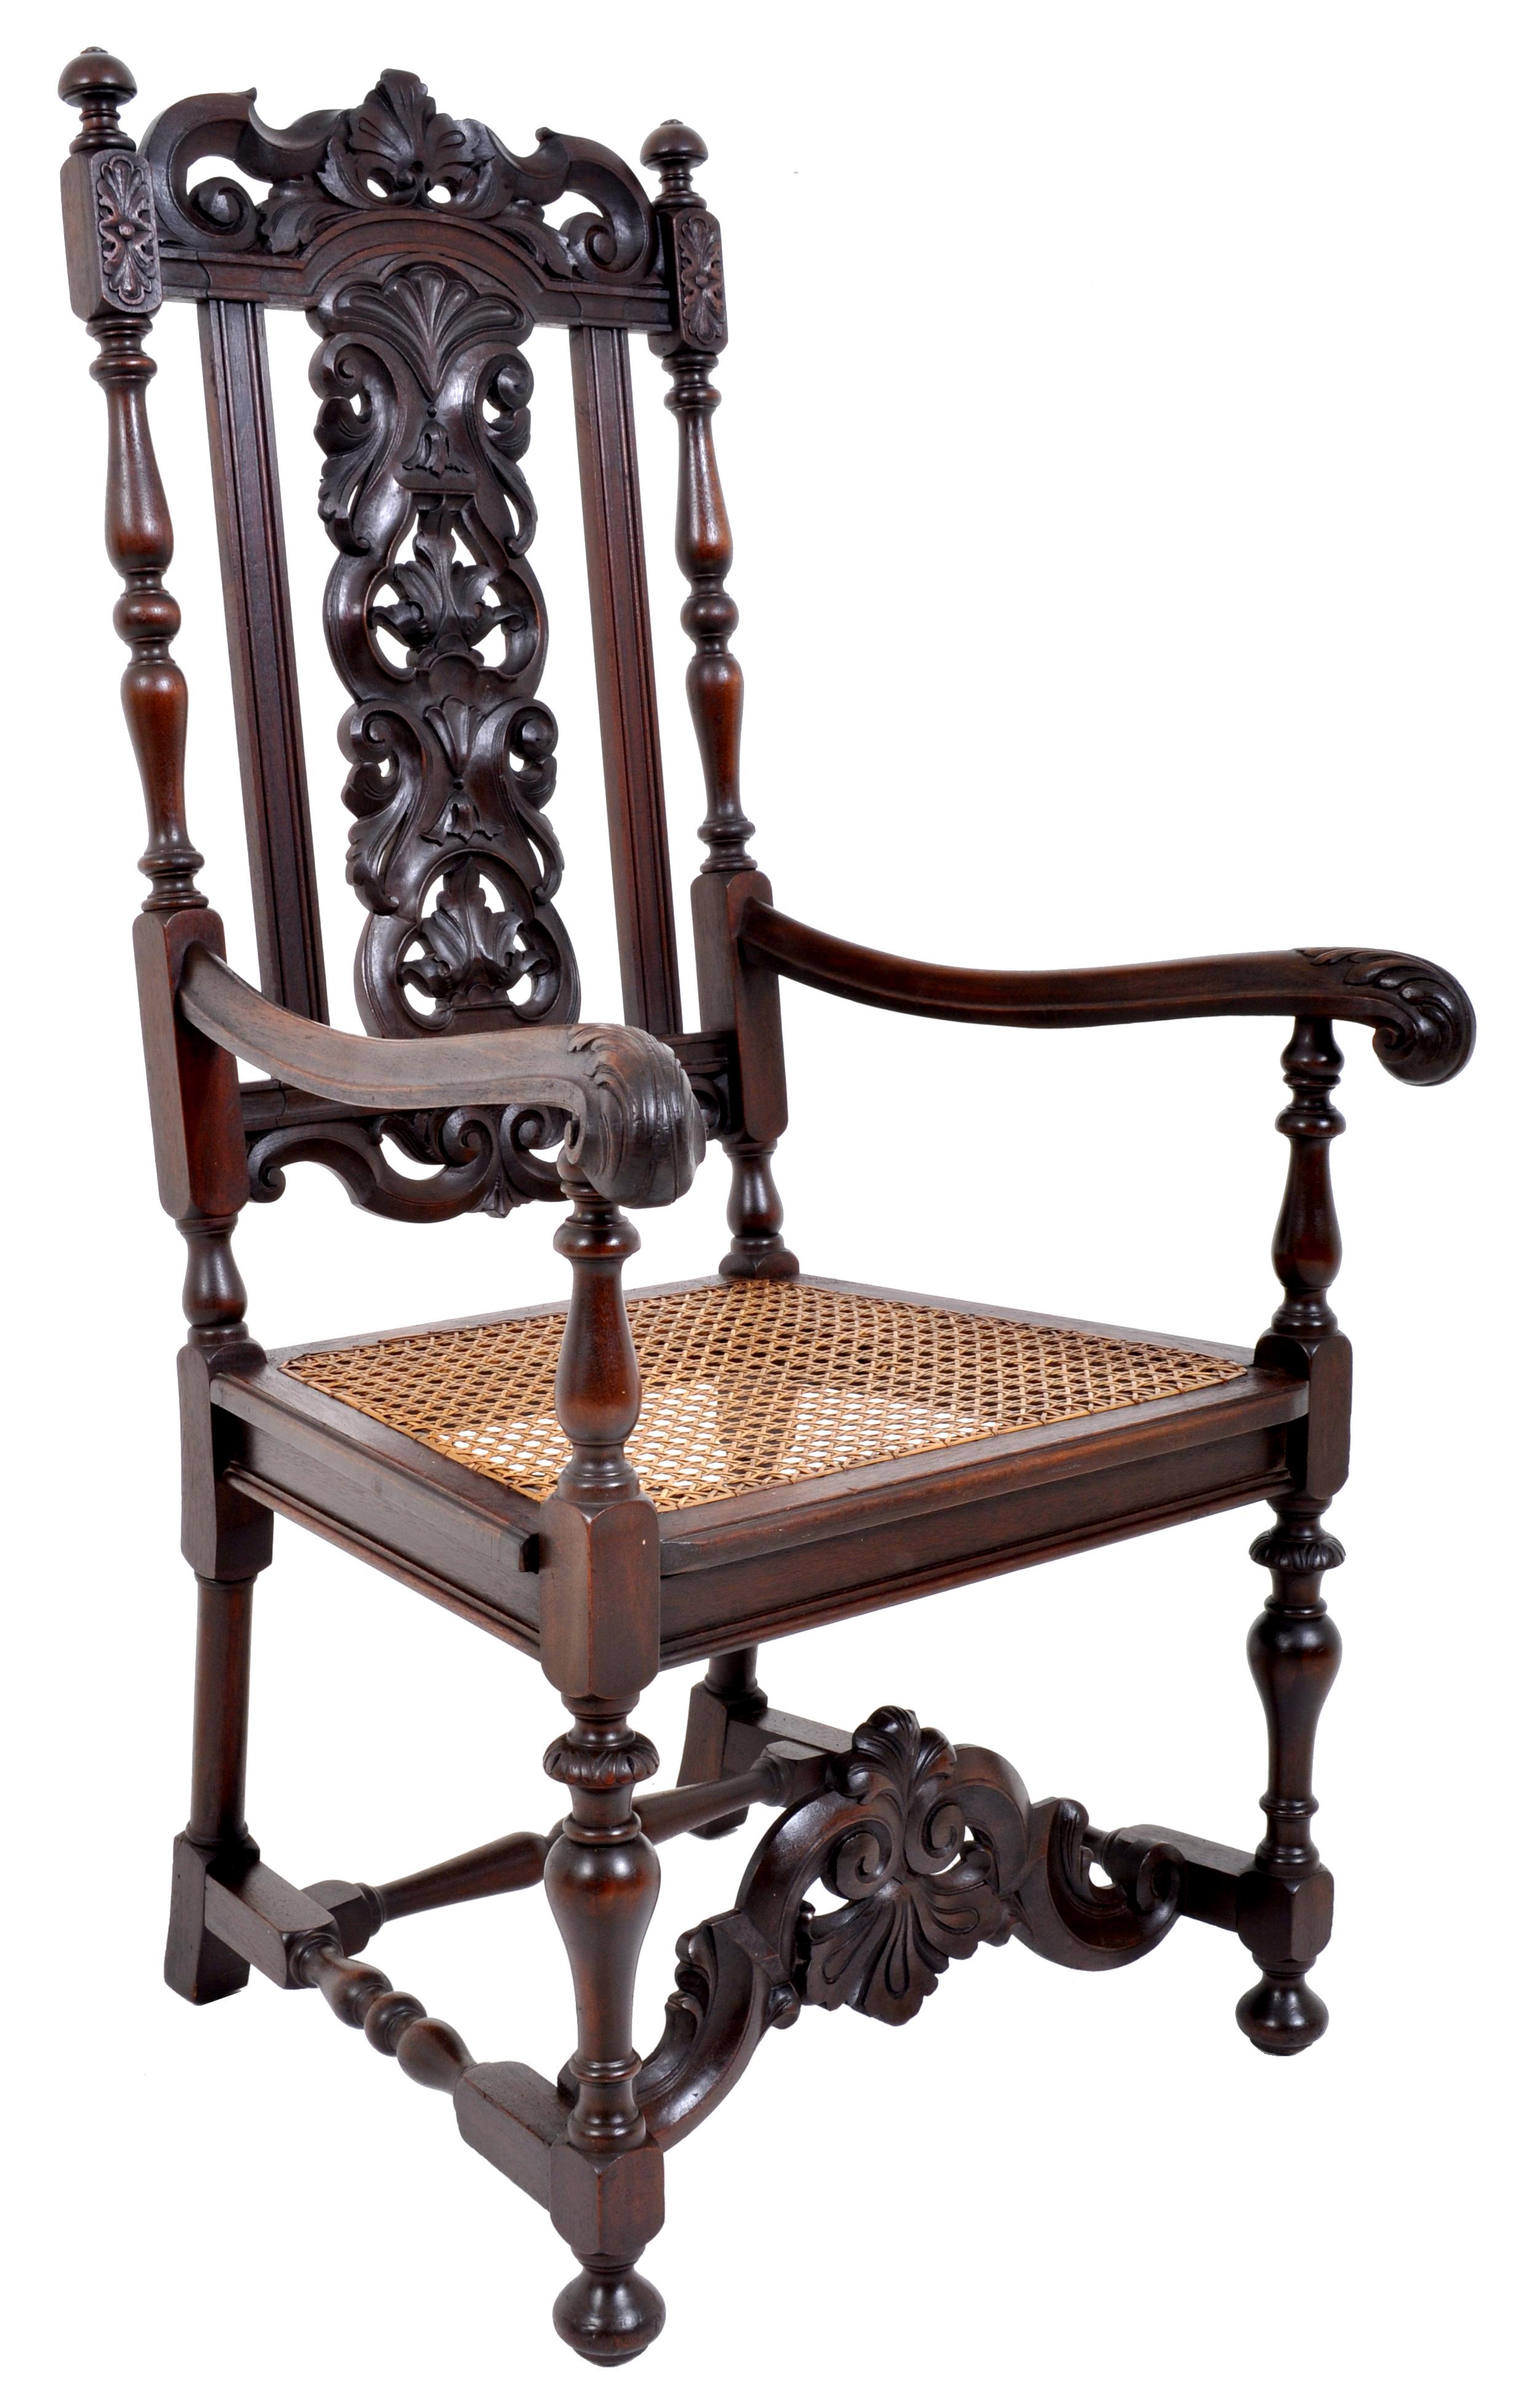 Antique Baroque carved walnut throne chair, circa 1880. The chair having a carved crest with a shell motif to the center flanked by a pair of finials, the central black-splat heavily and deeply carved with acanthus leaves and flanked by turned